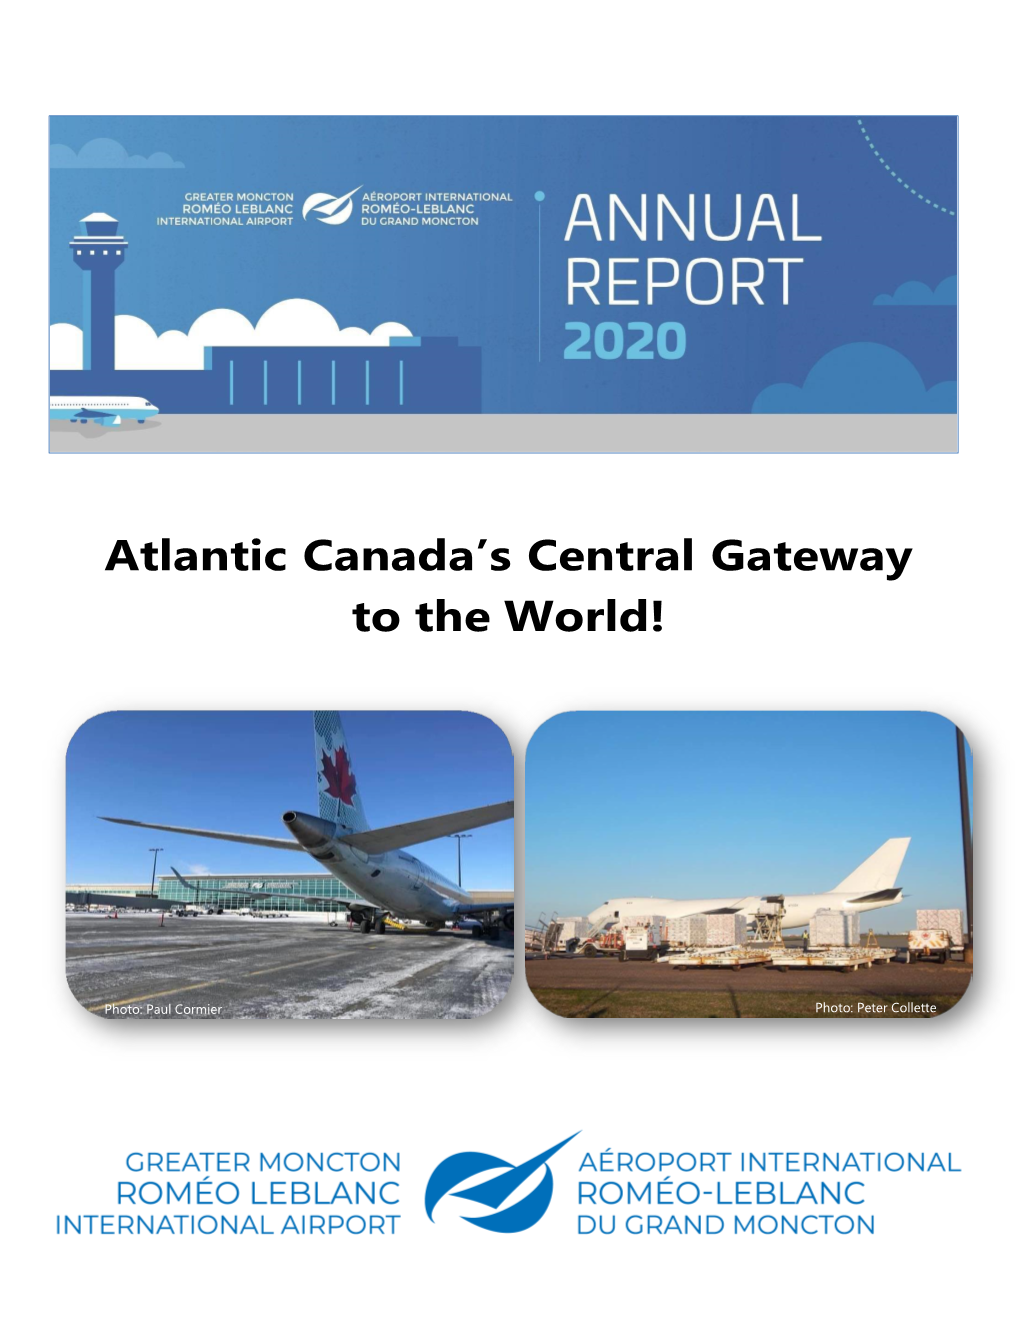 Atlantic Canada's Central Gateway to the World!